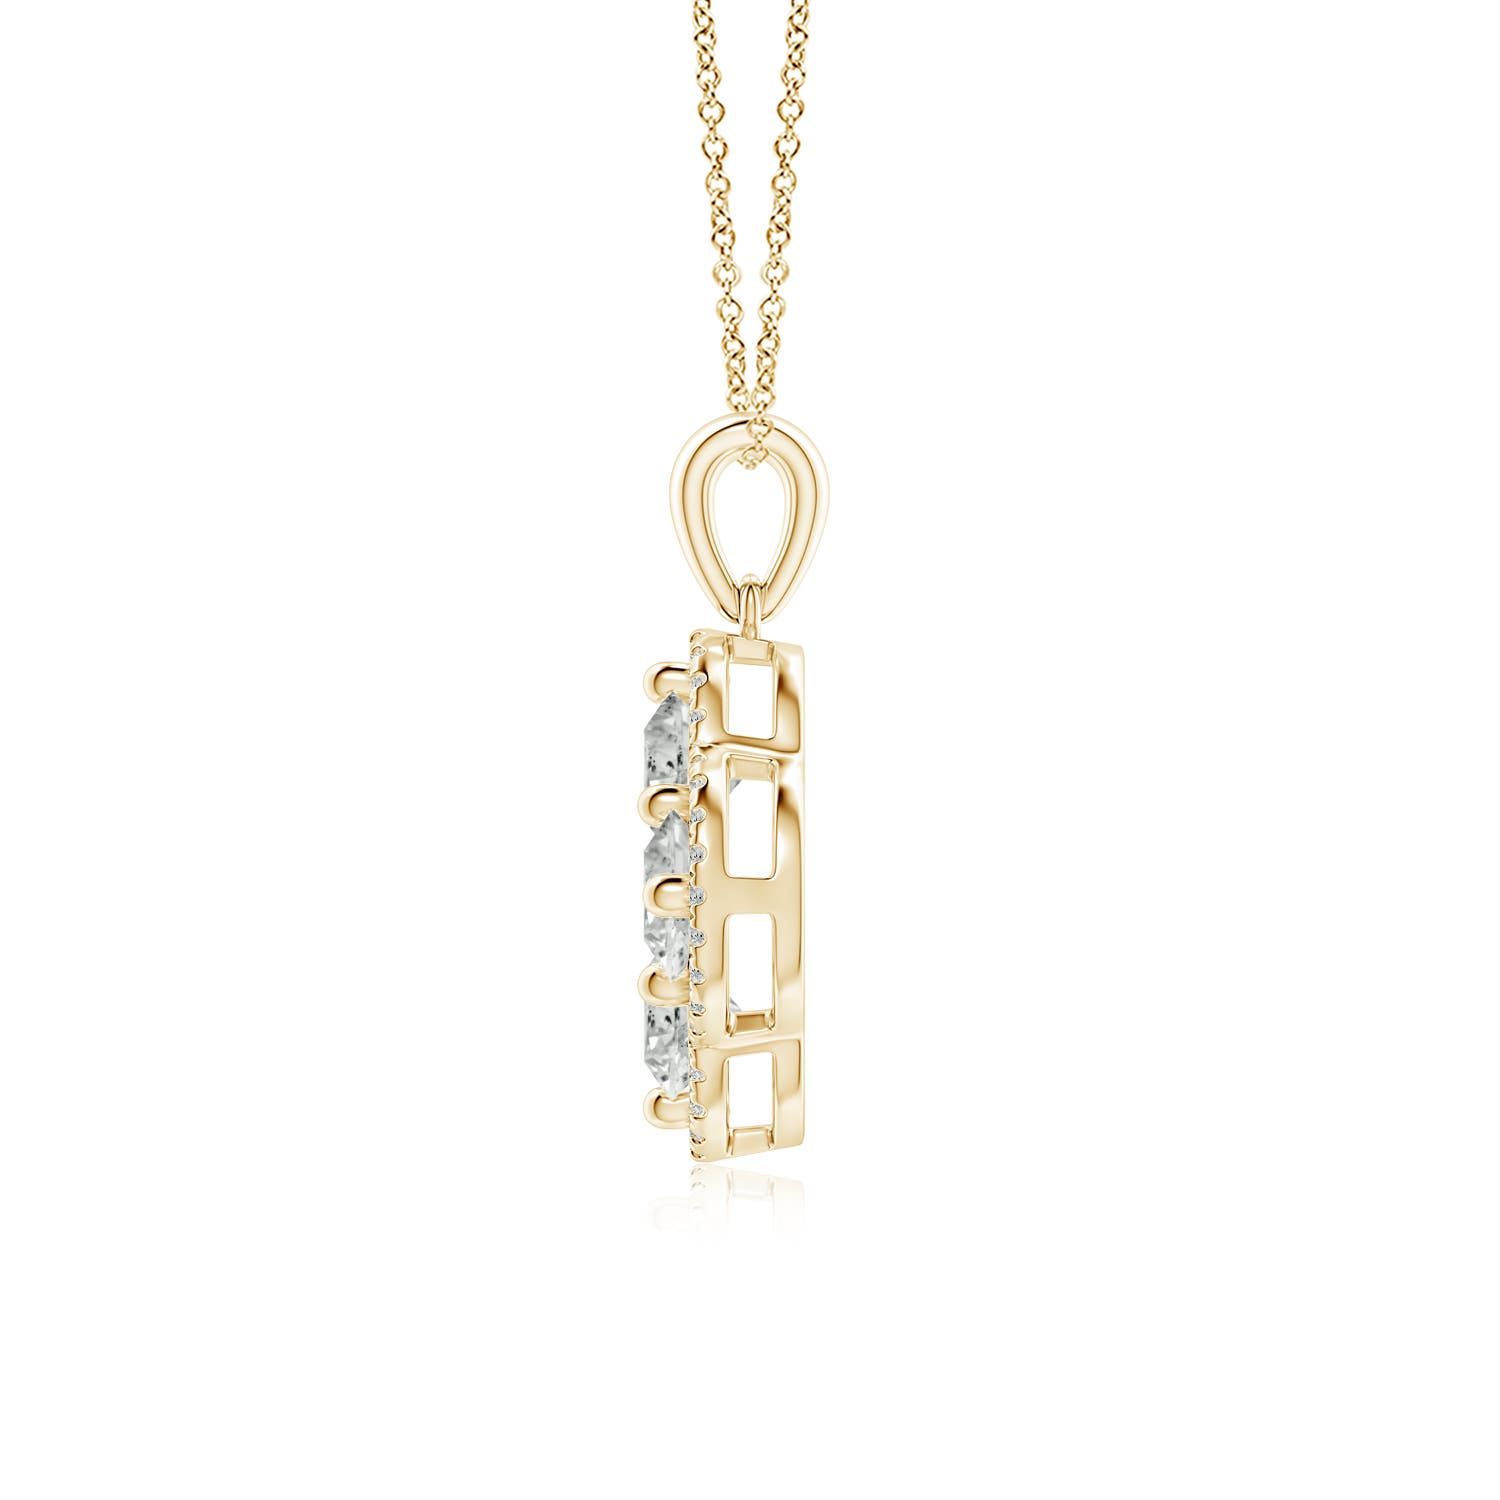 K, I3 / 1.6 CT / 14 KT Yellow Gold